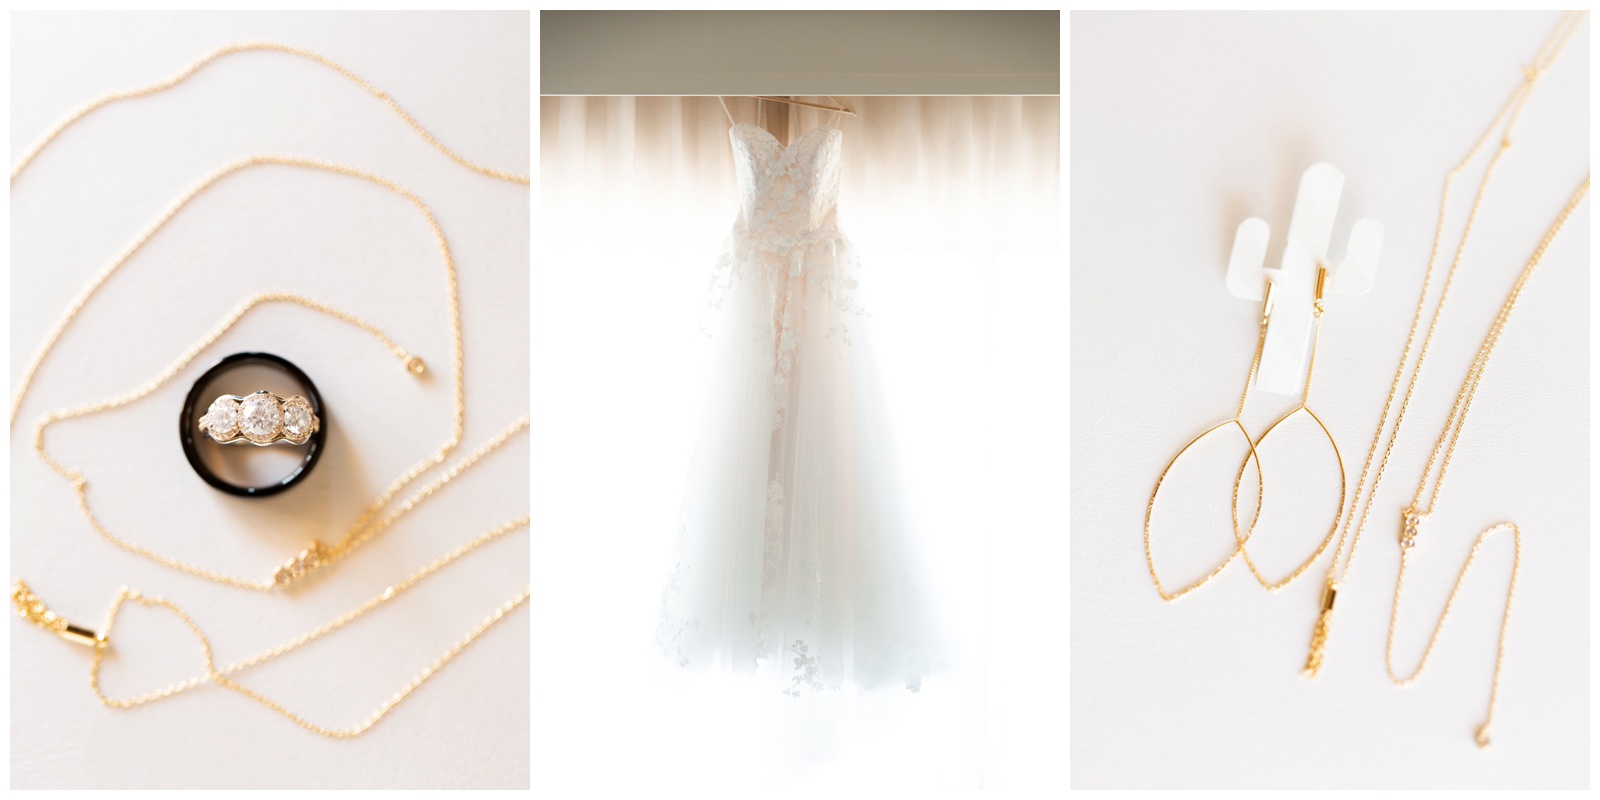 details of the brides jewelry and dress - riane roberts